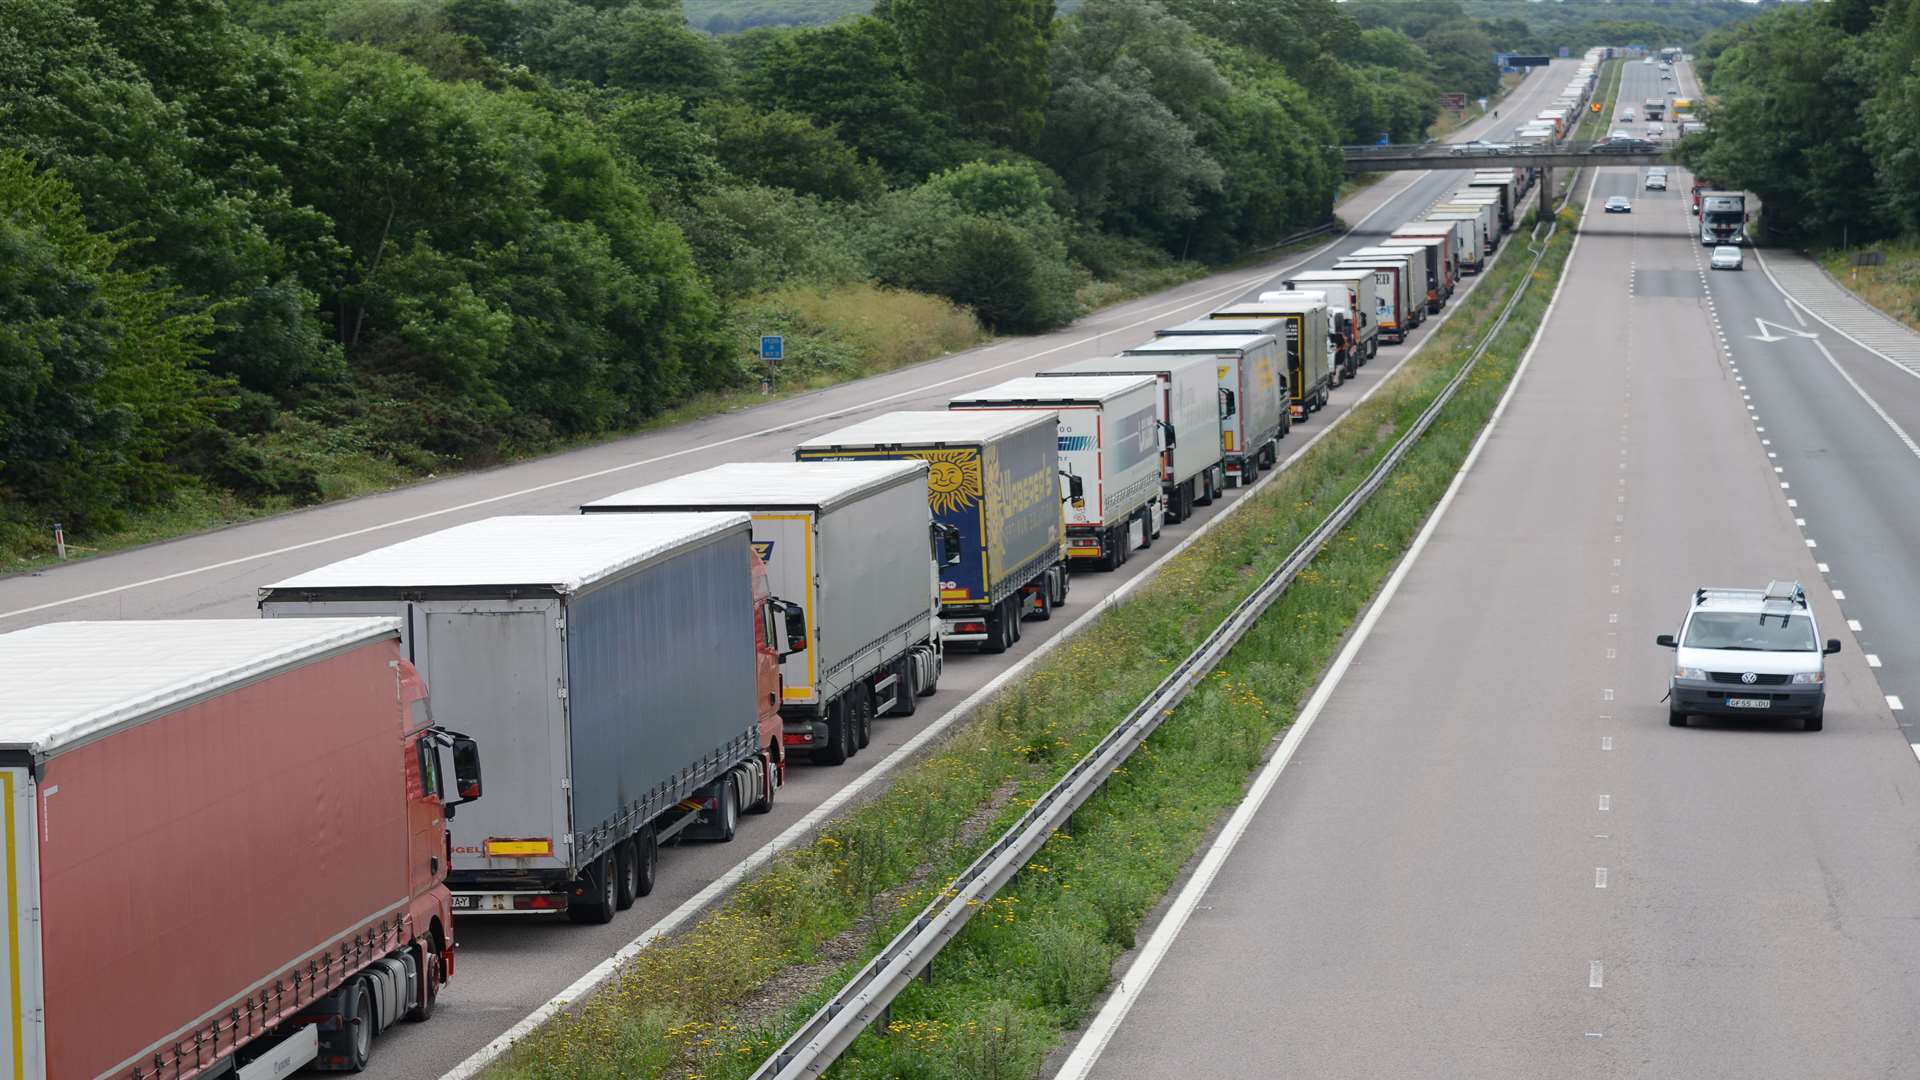 Lorries queing coast bound between junction 9 and junction 10 in Ashford during Operation Stack